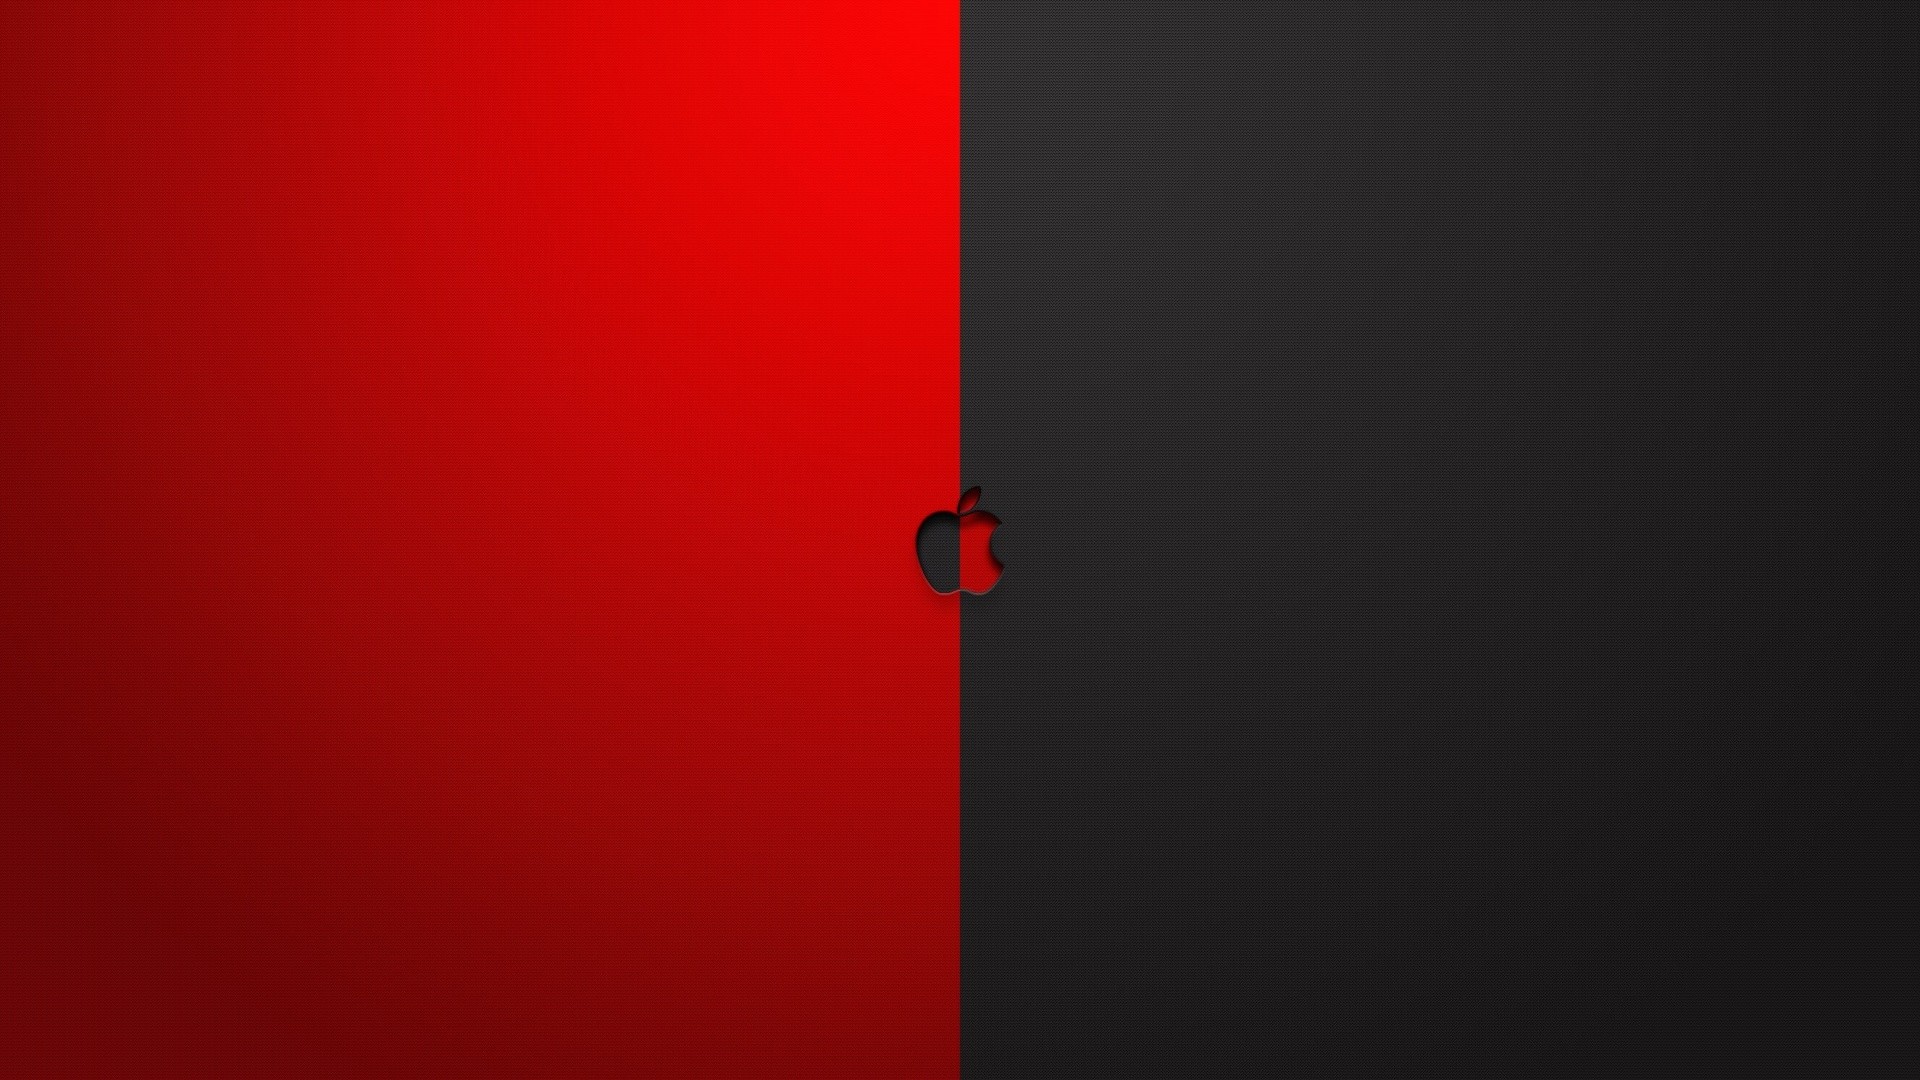 1920x1080 Red And Black Hd Wallpaper 5 Desktop Background